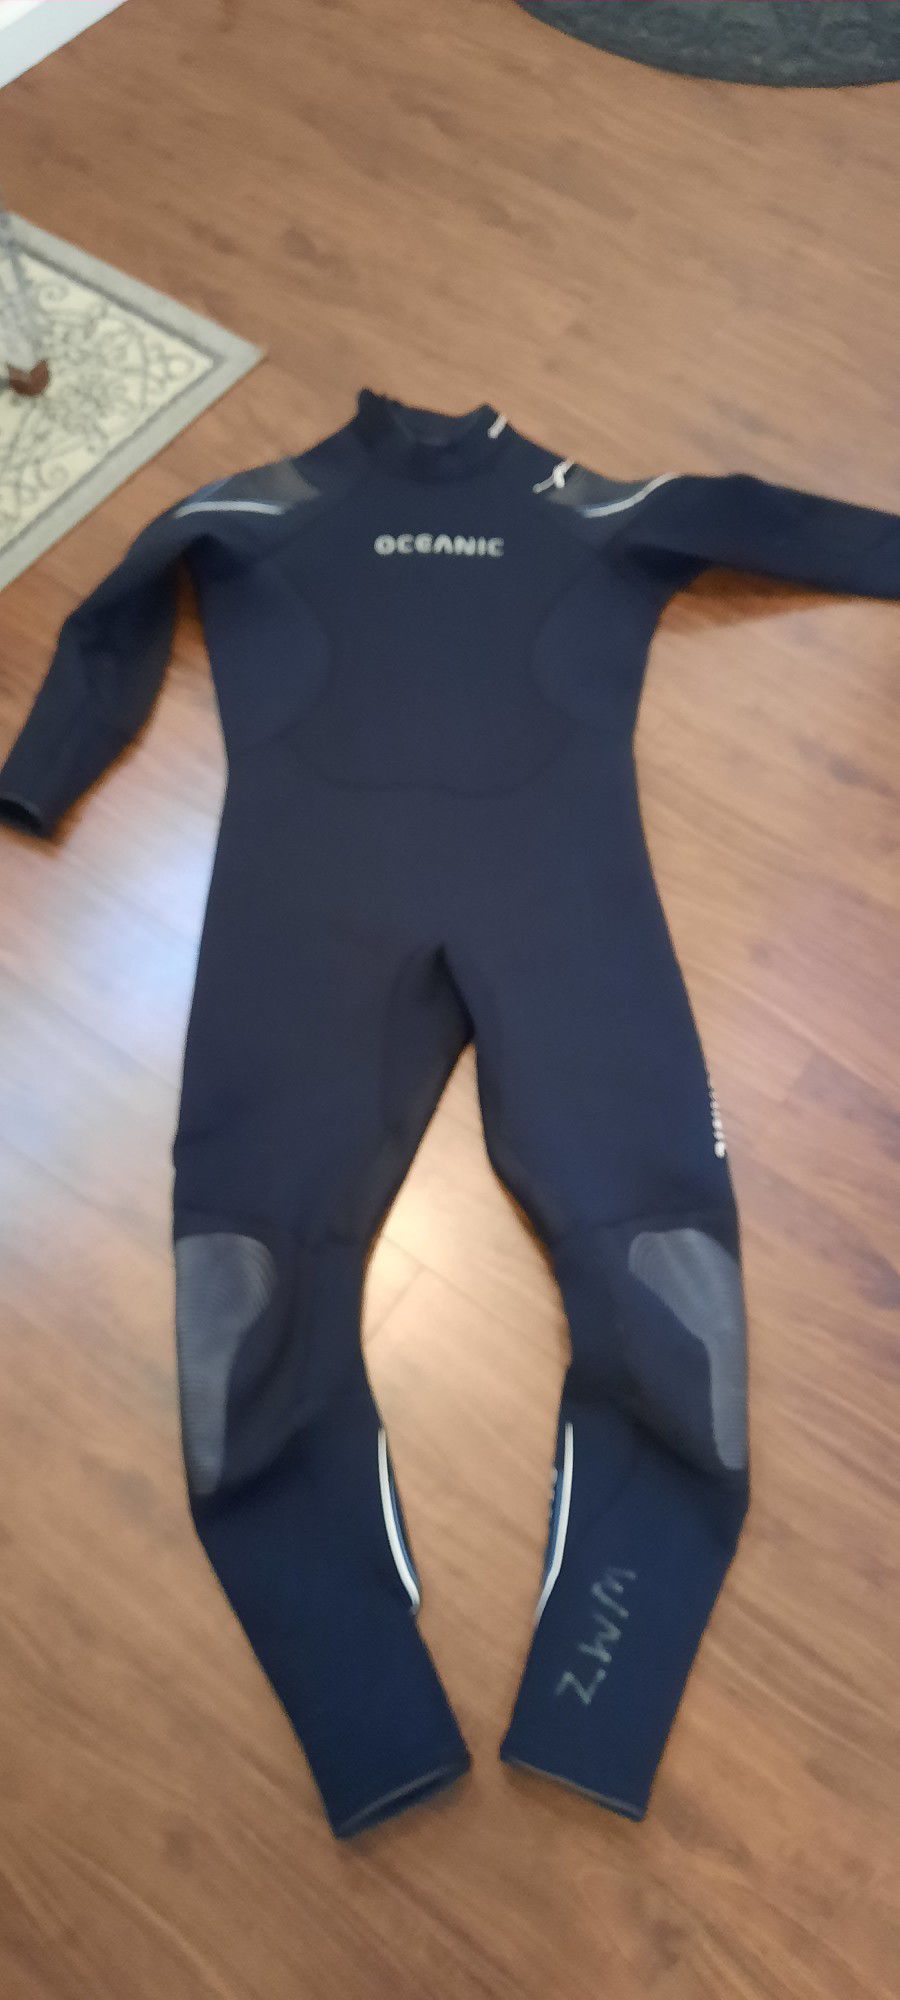 3/2 mm wetsuit Men’s Size XL – Used but still in good condition Oceanic 3/2 mm Wetsuit - $80 OBO